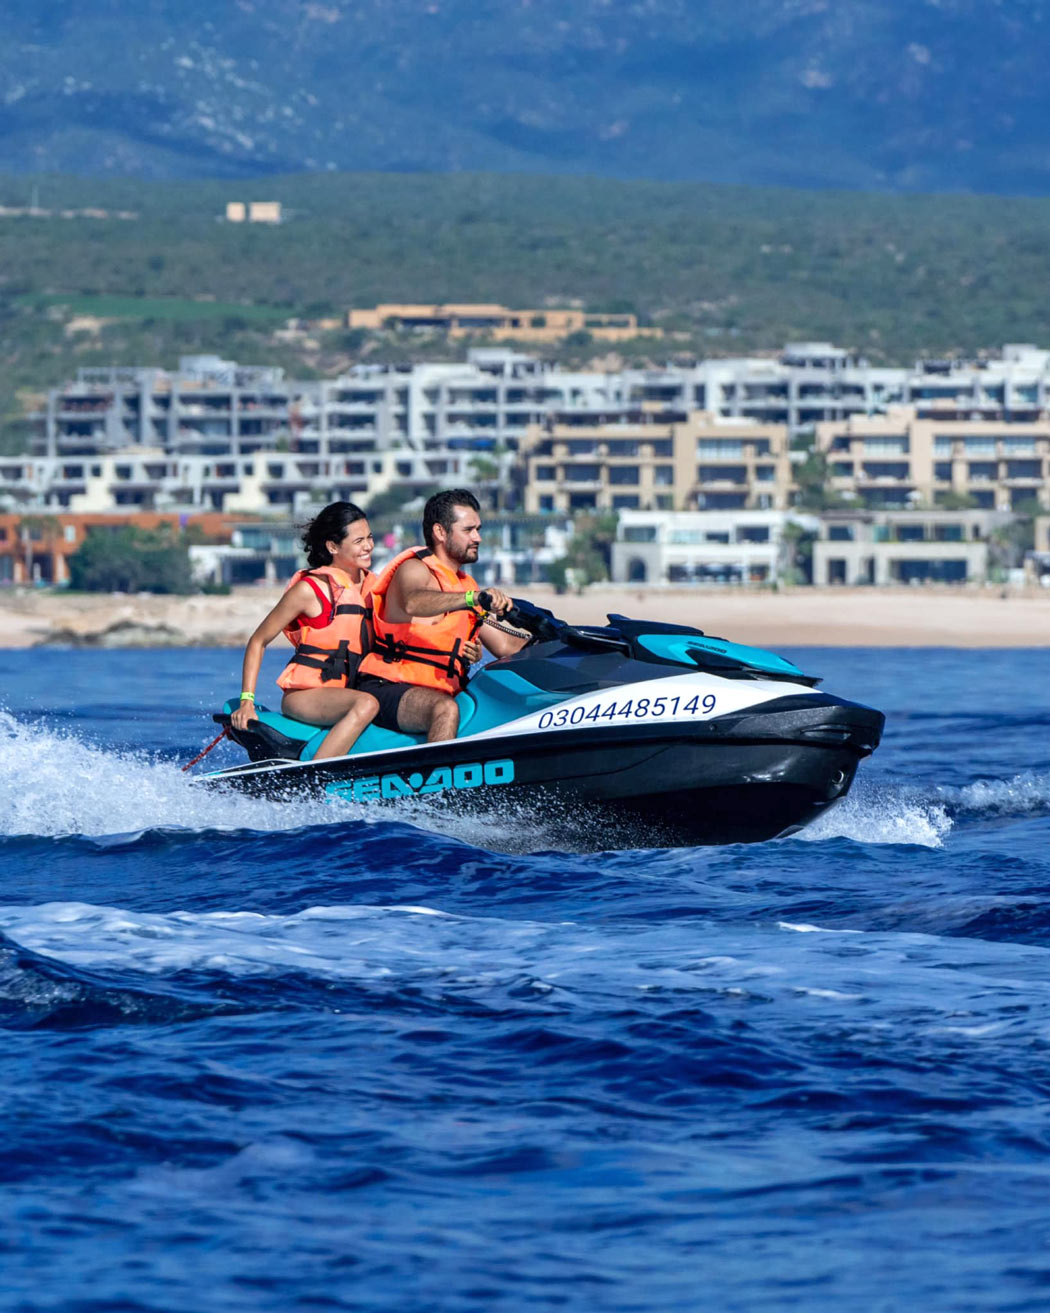 Couple whizzing across the water on a jet ski in Cabo San Lucas